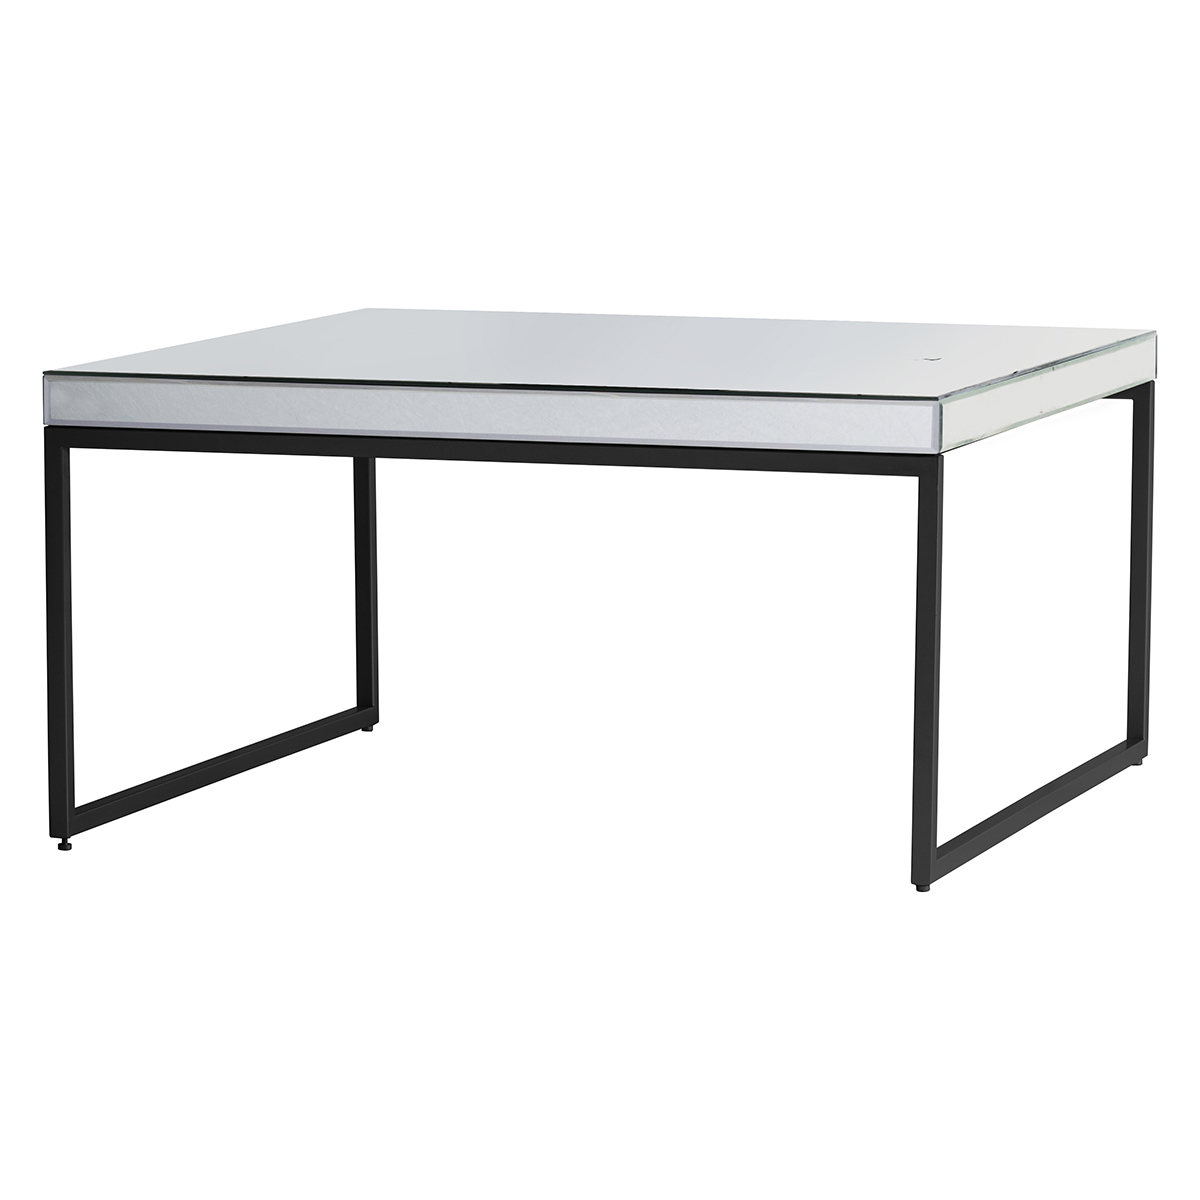 Gallery Direct Pippard Coffee Table Black